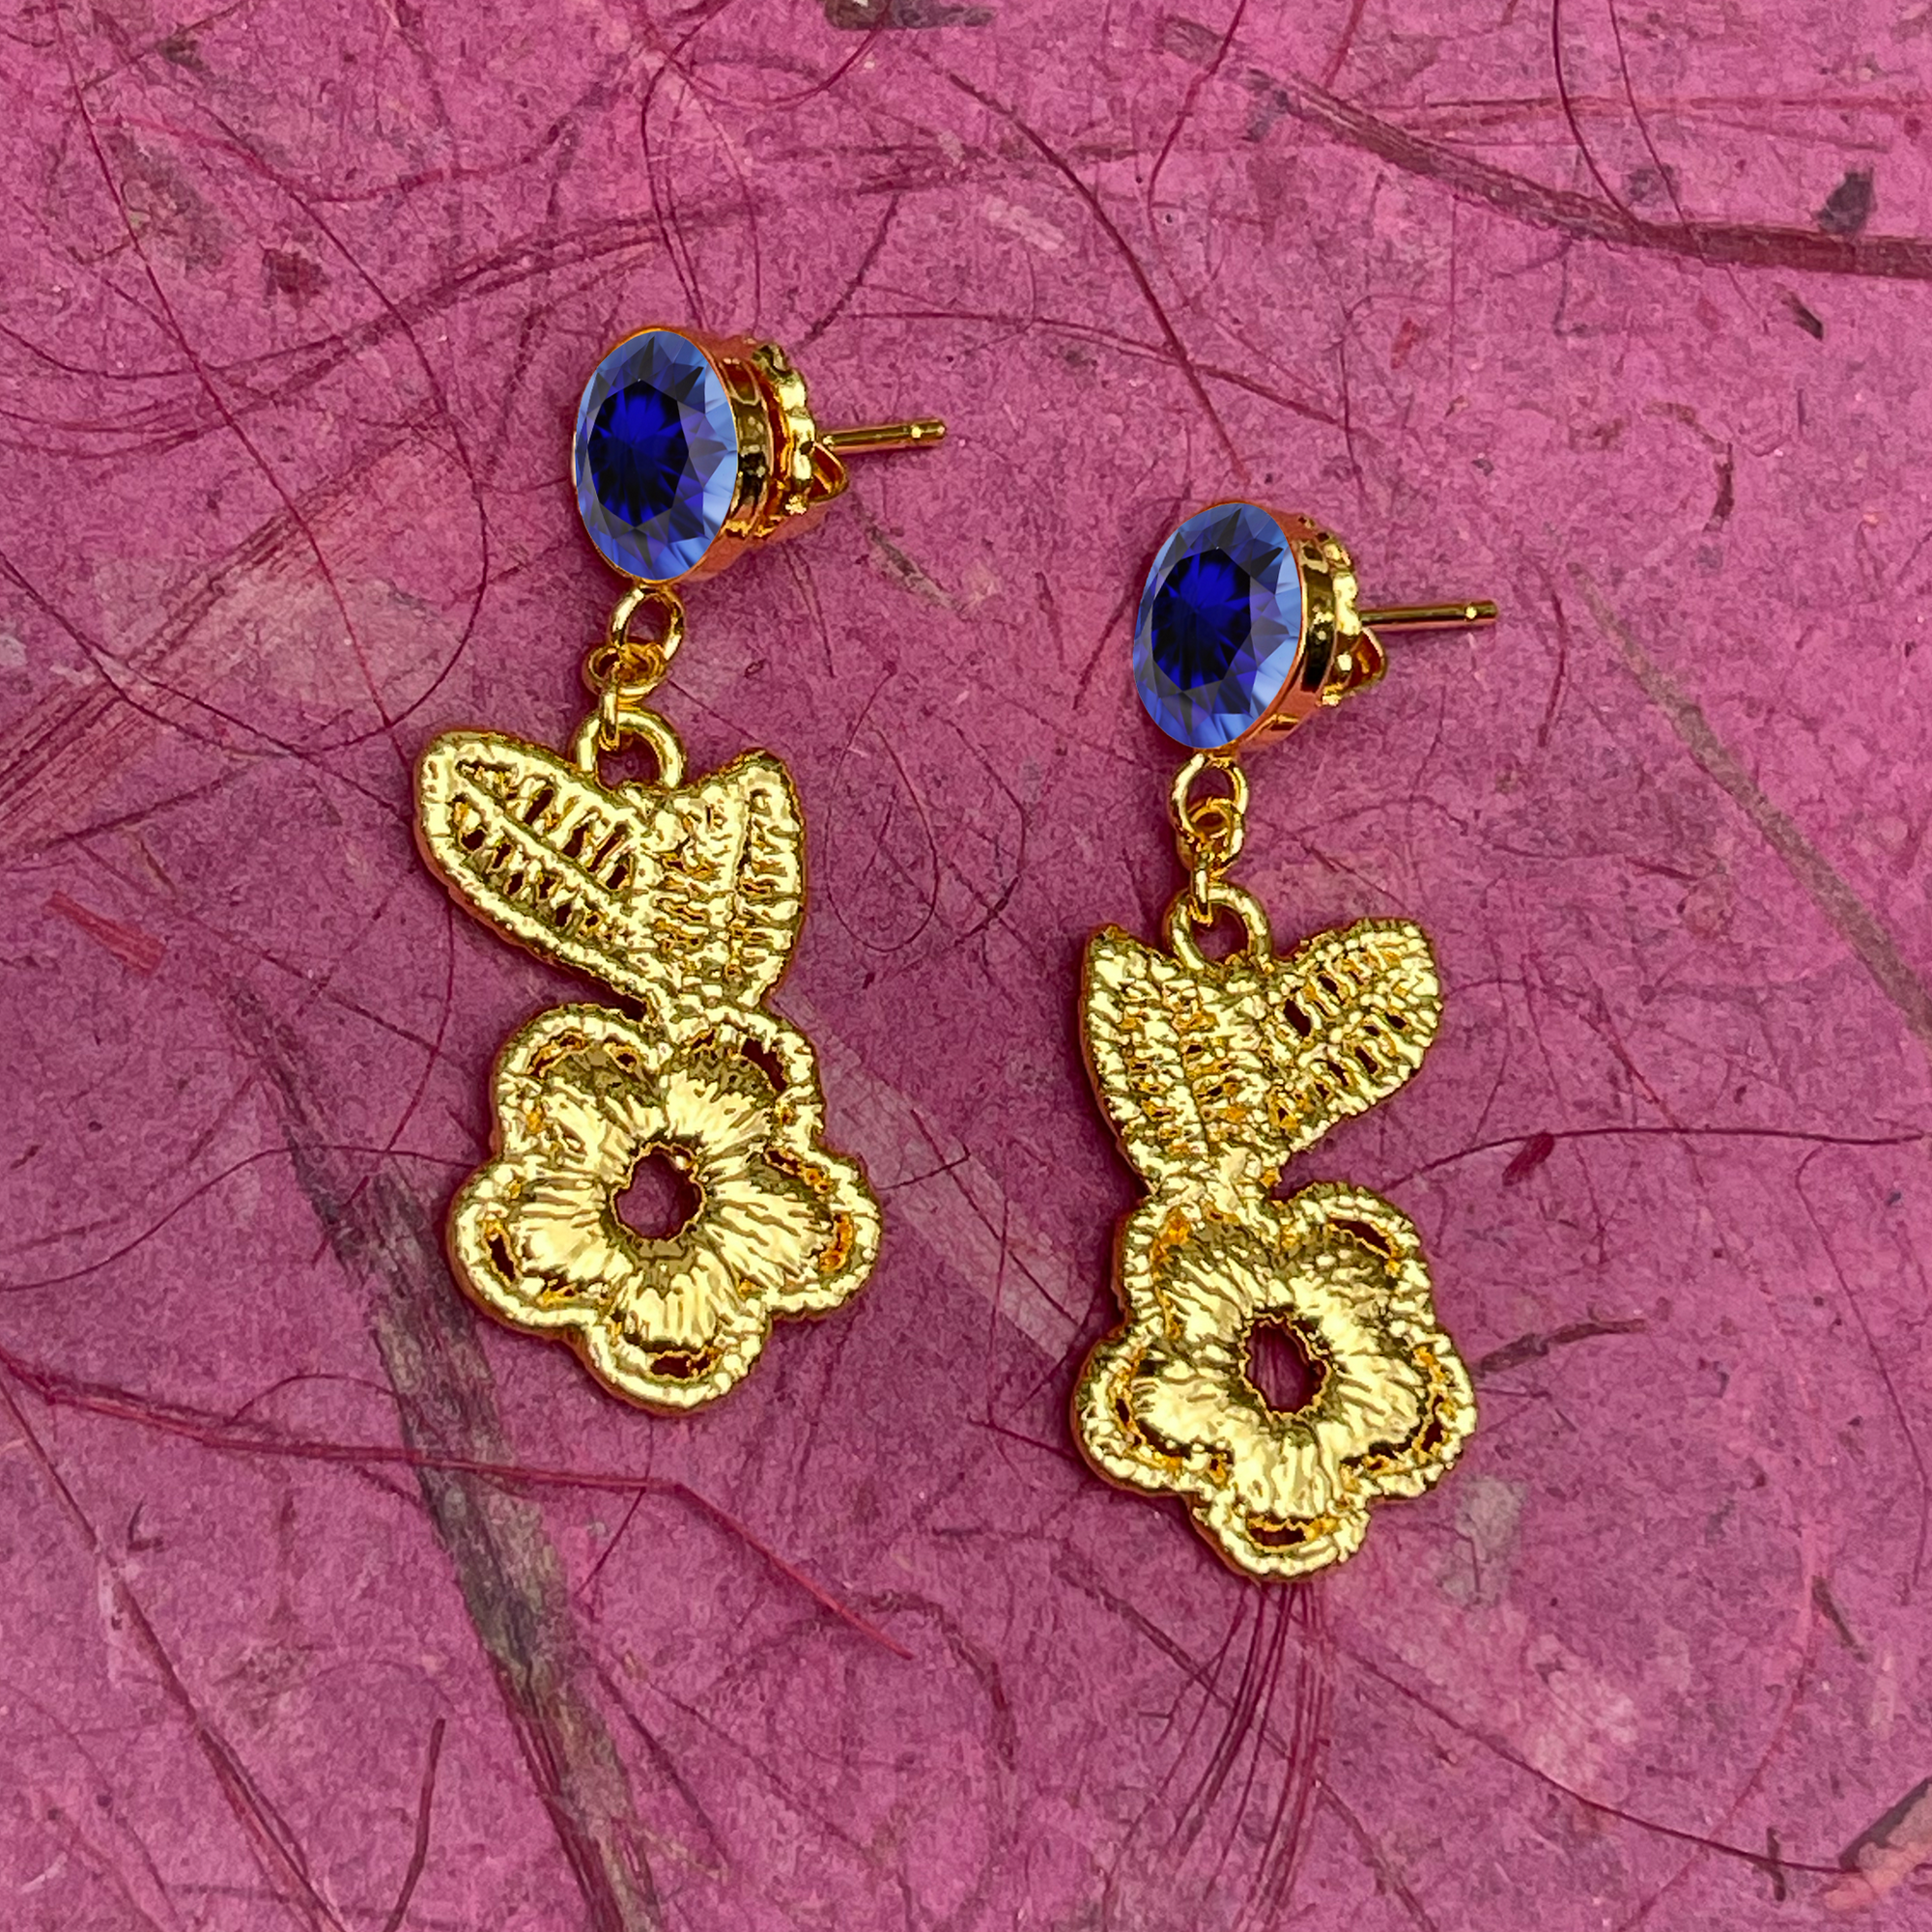 Flower lace earrings in 24k gold with blue sapphires.